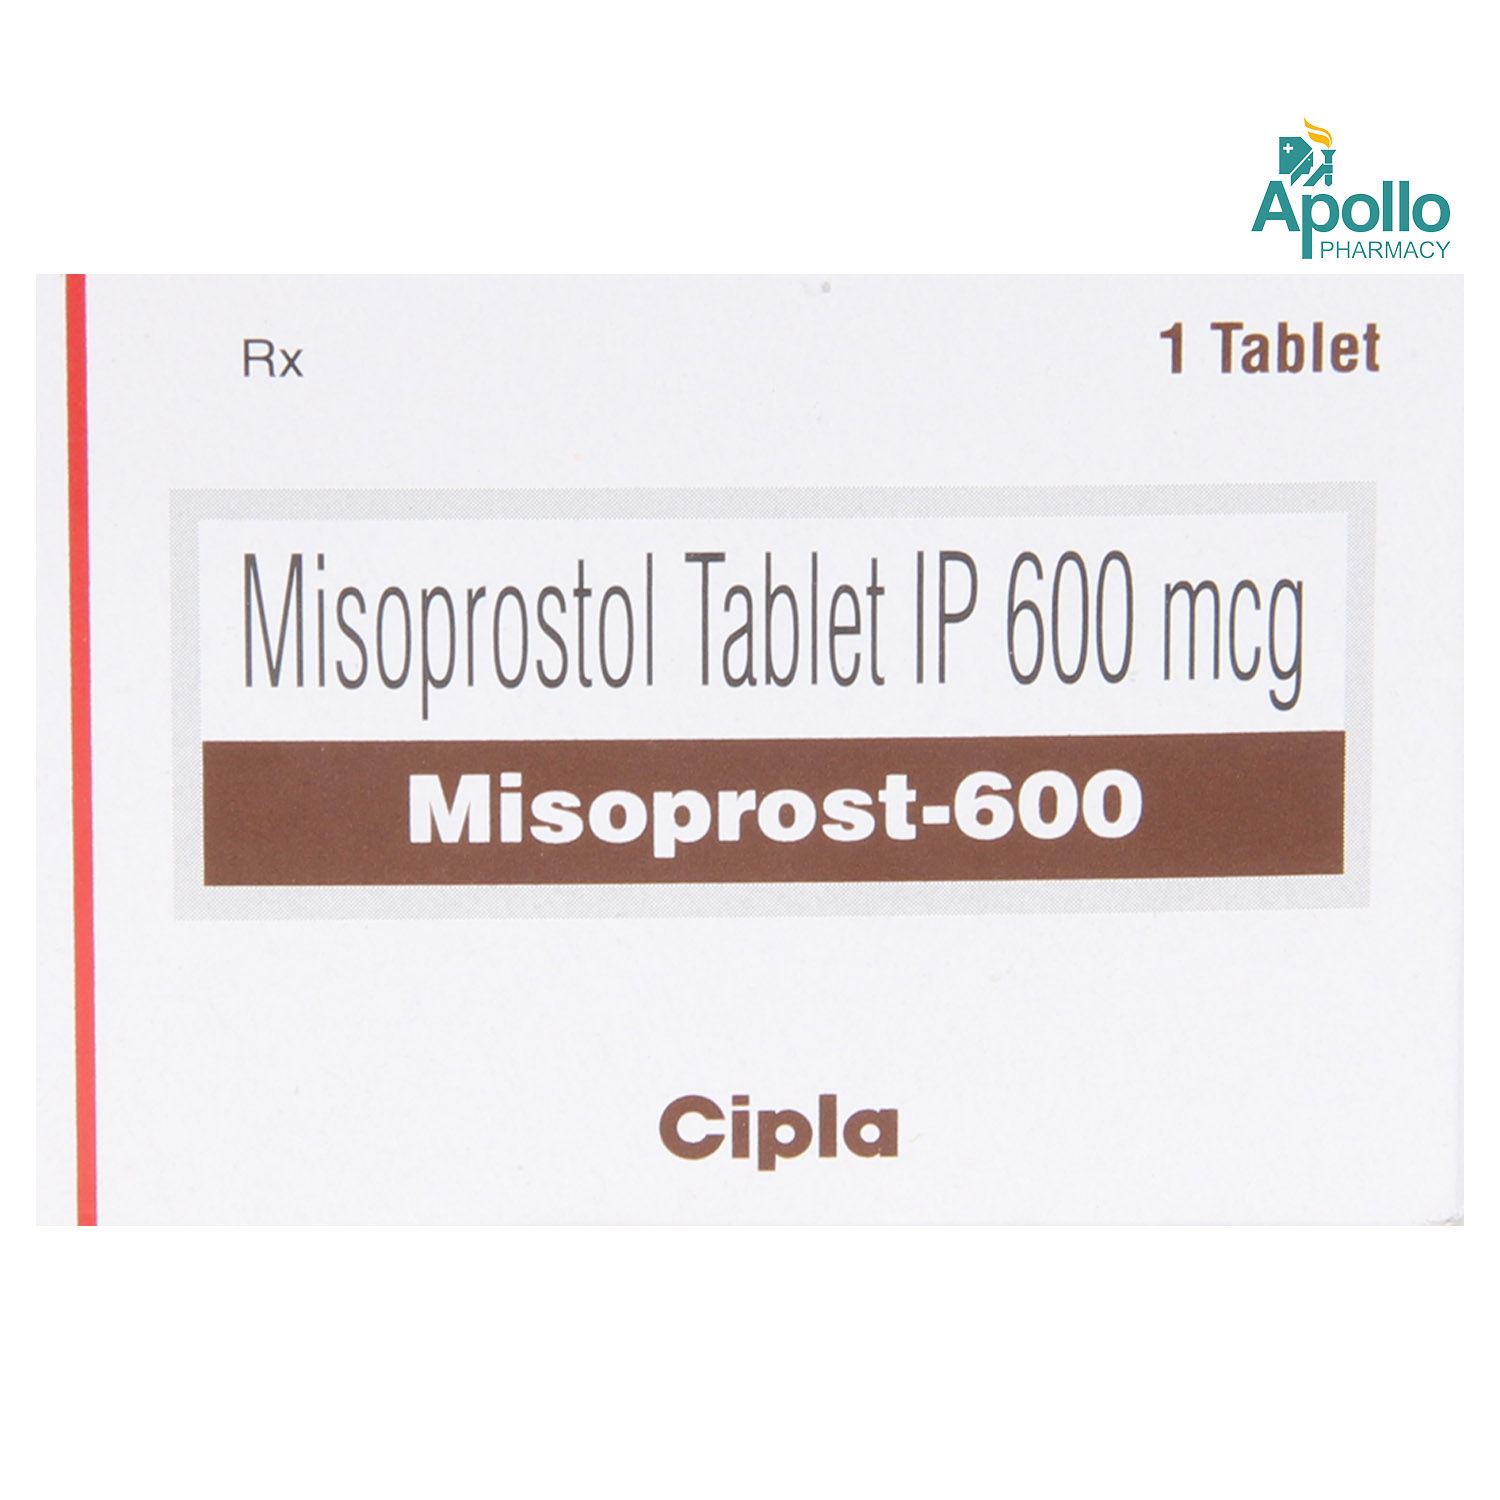 MISOPROST 600MCG TABLET, Pack of 1 TABLET